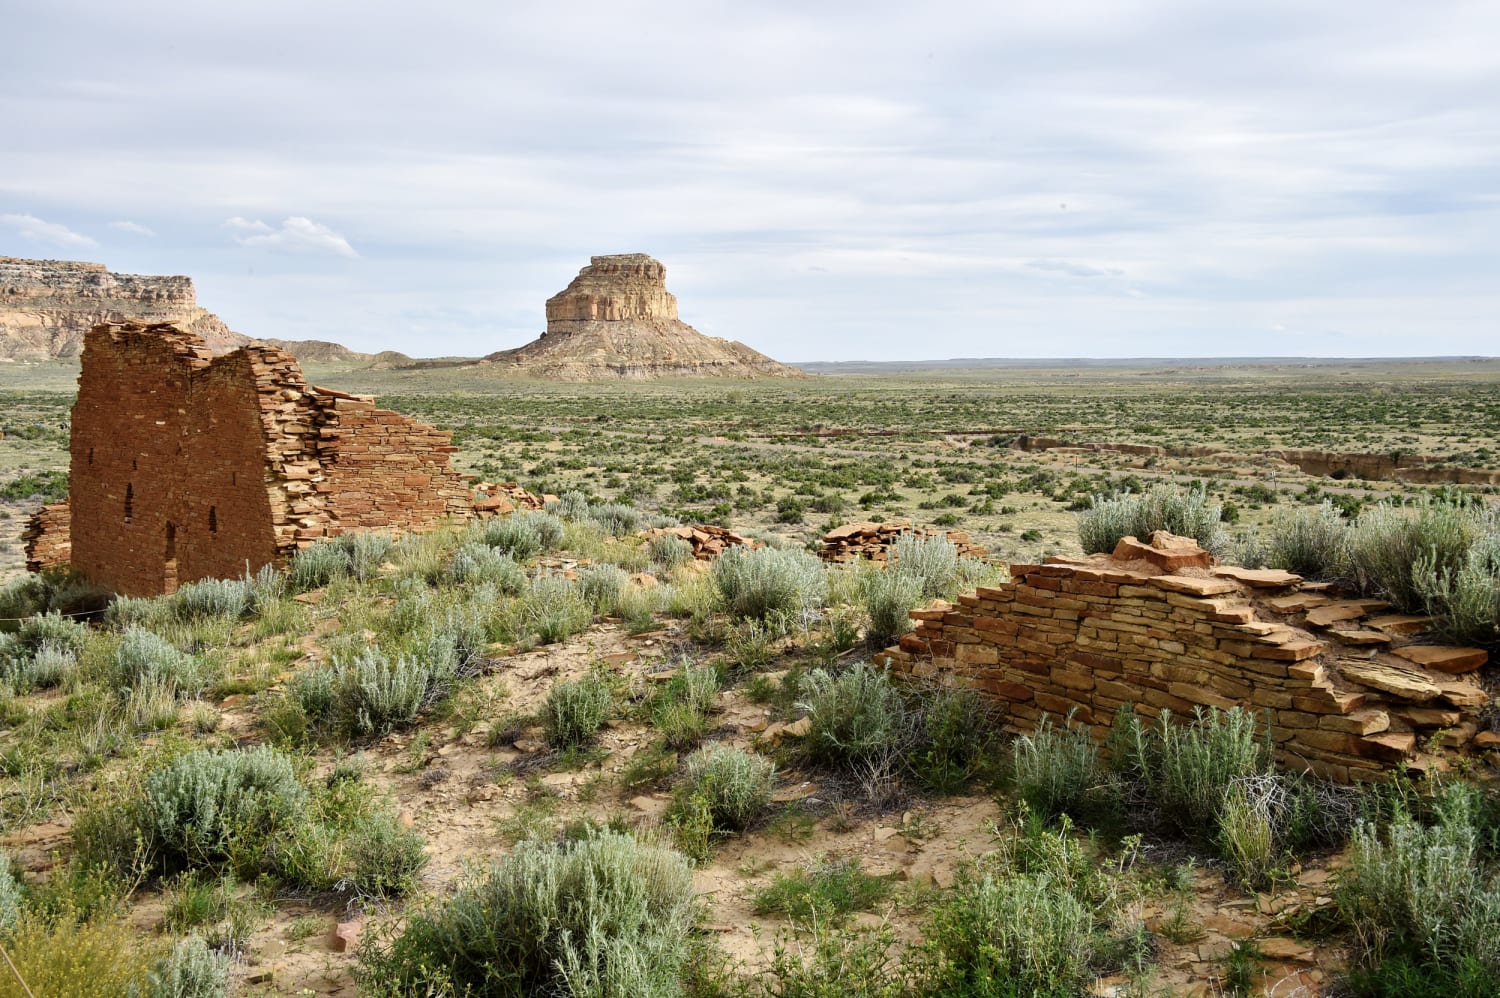 Biden proposes 20-year ban on oil and gas drilling around Chaco Canyon